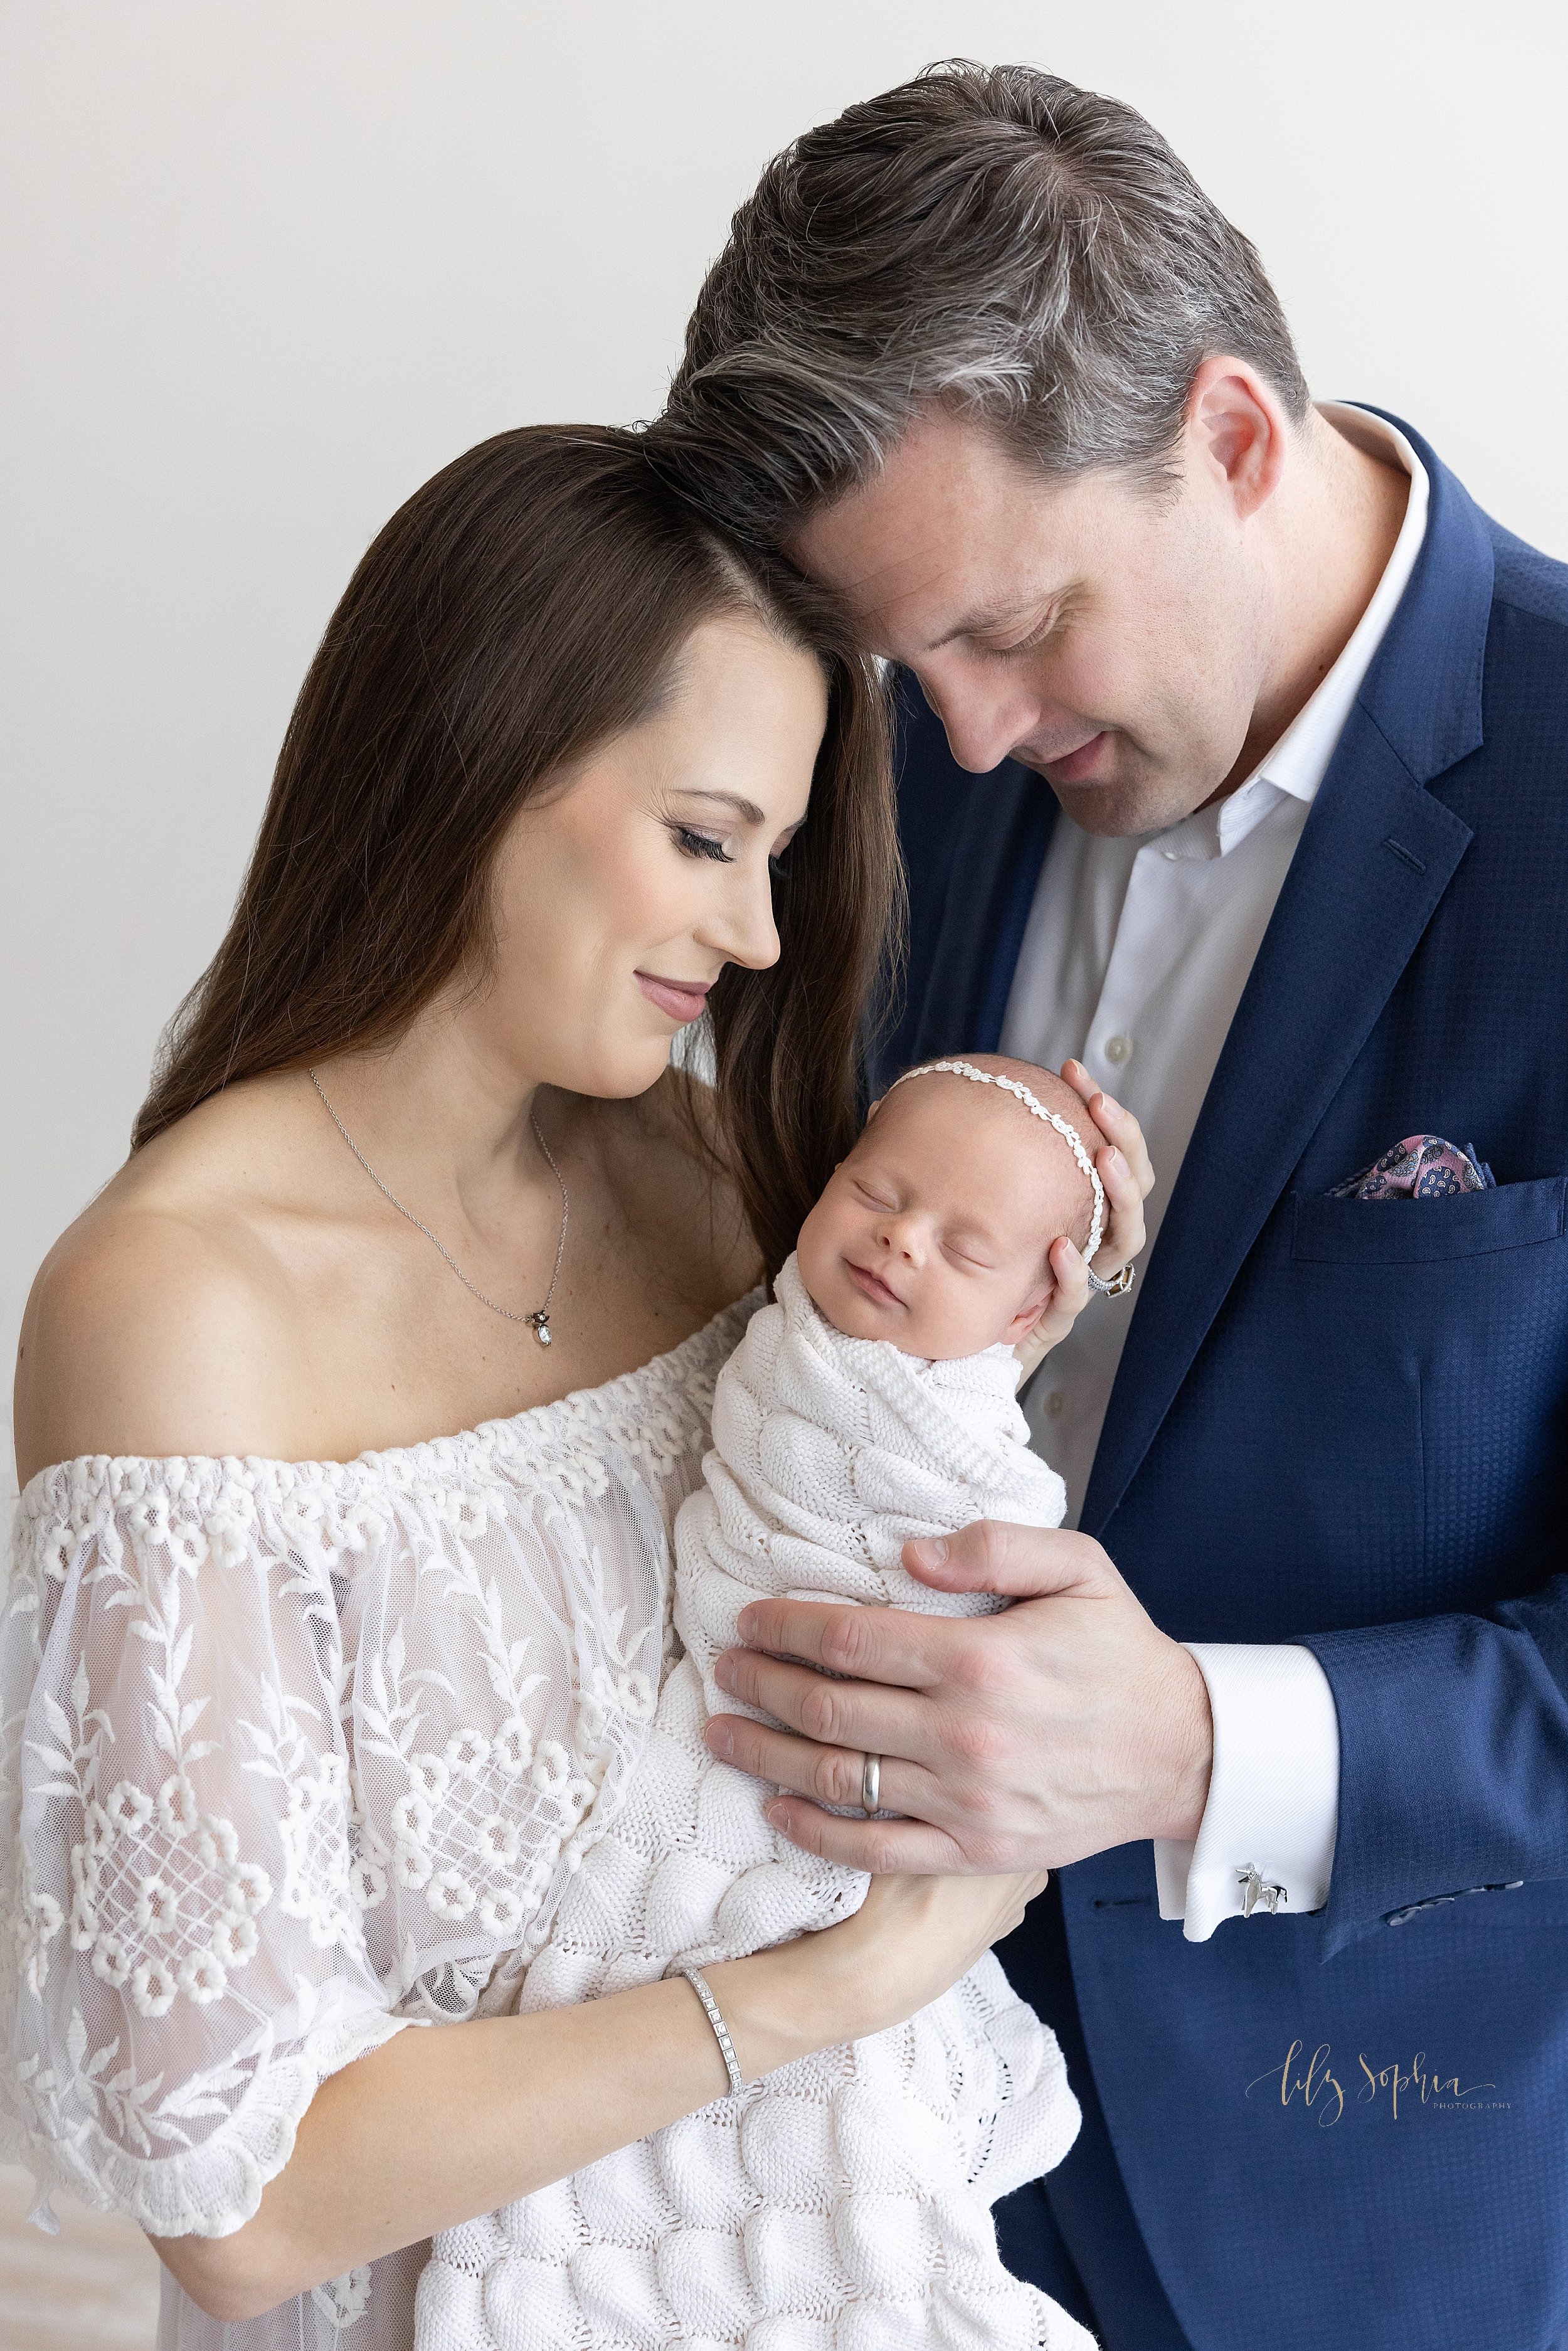  Newborn photo shoot with mom holding her peacefully sleeping and smiling newborn daughter who is swaddled in a soft white knit blanket to her chin and wearing a delicate laurel headband in her hair as dad stands next to mom’s left shoulder, places h